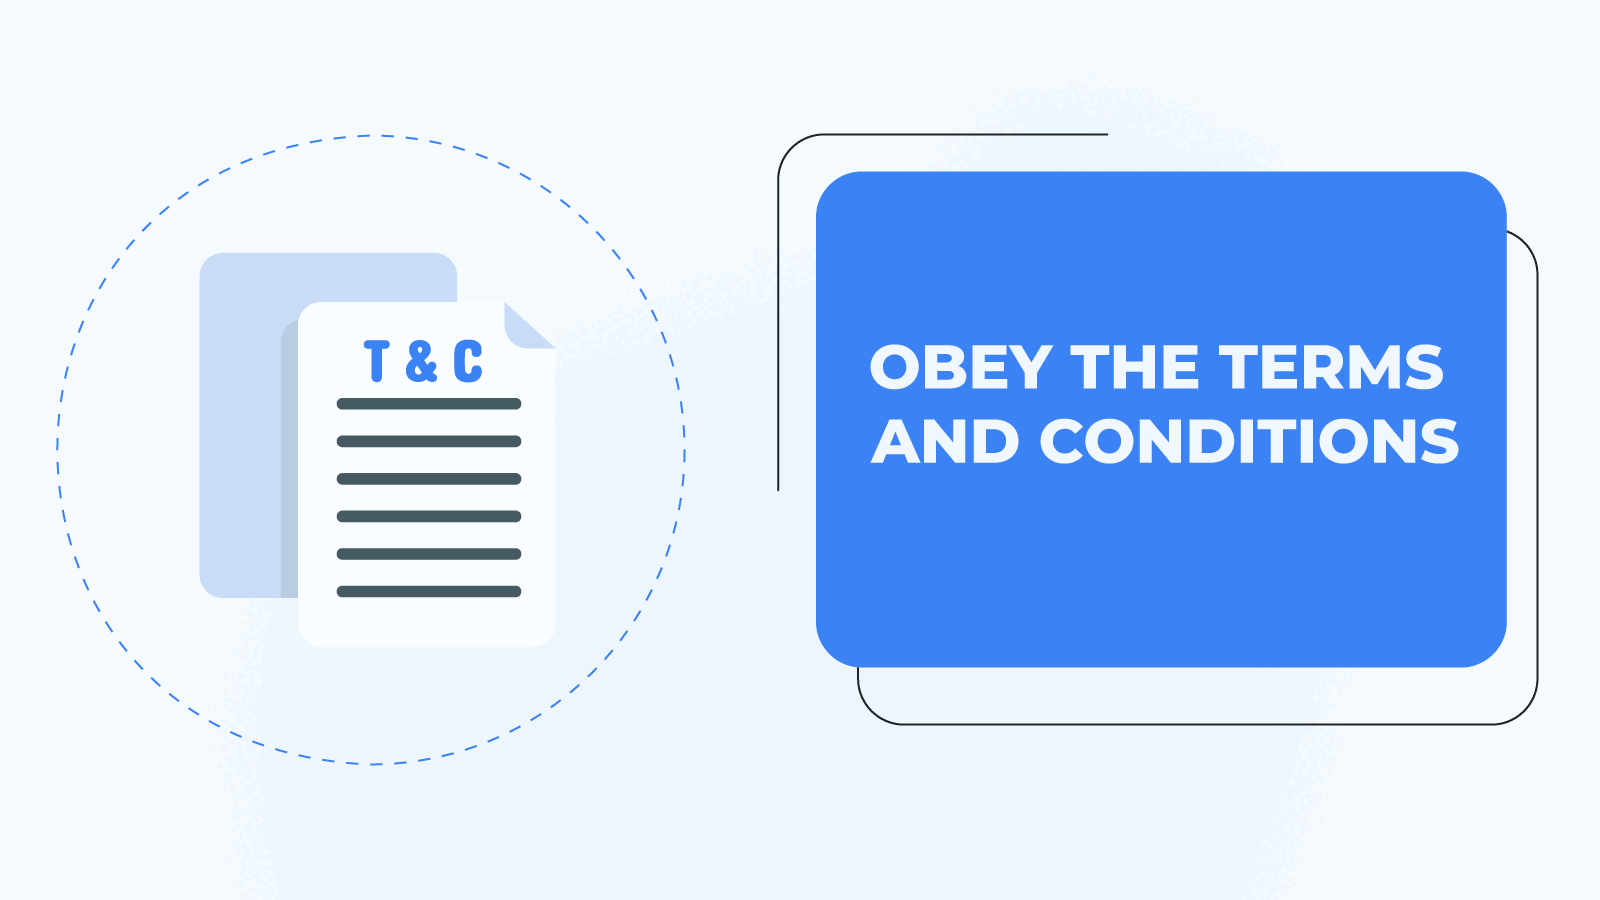 Obey the terms and conditions